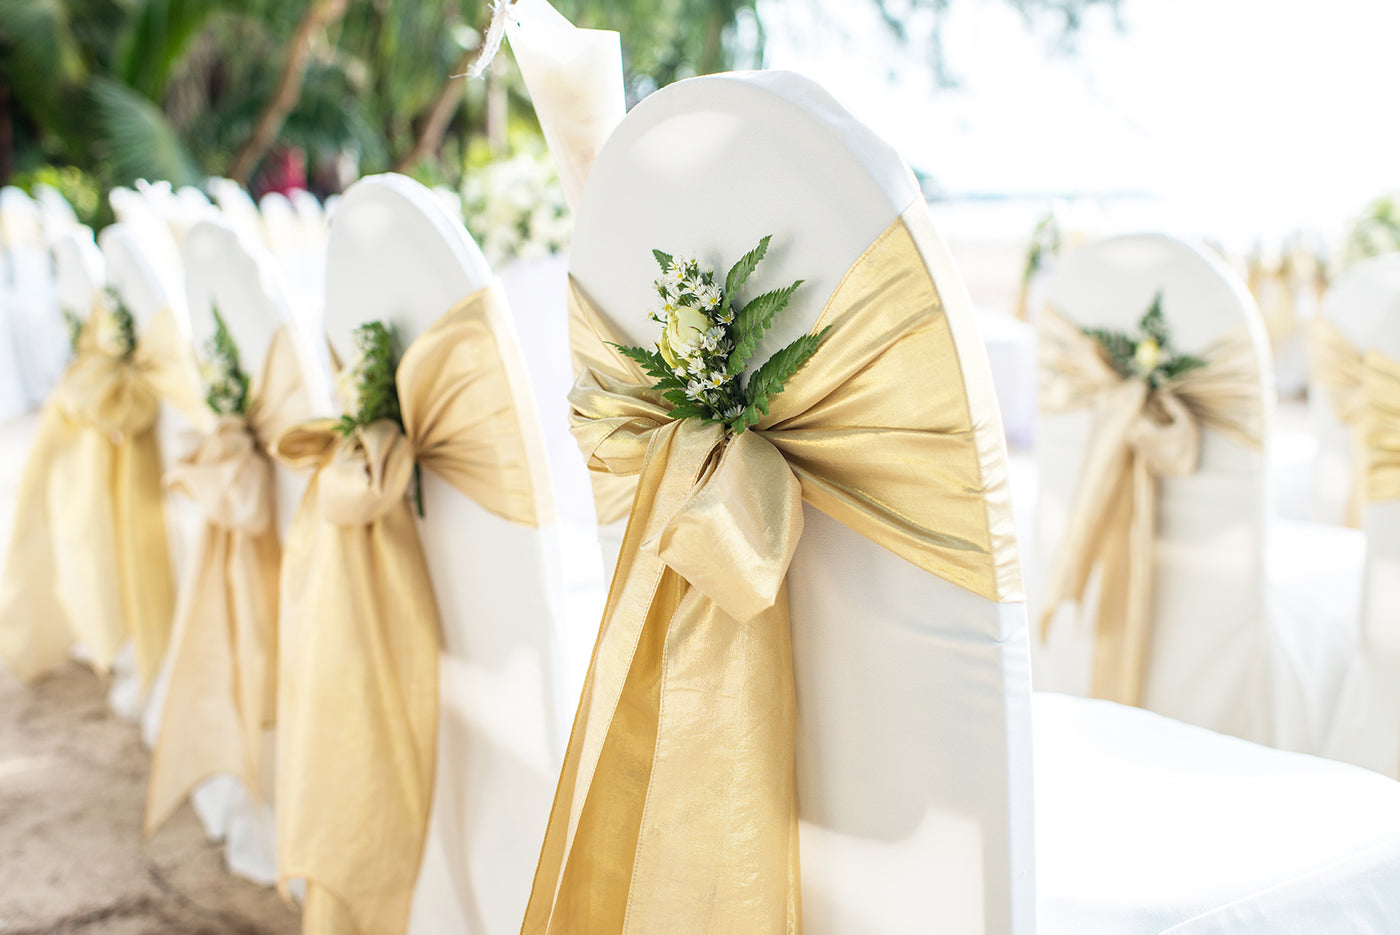 Wedding Chair Sashes & Bands